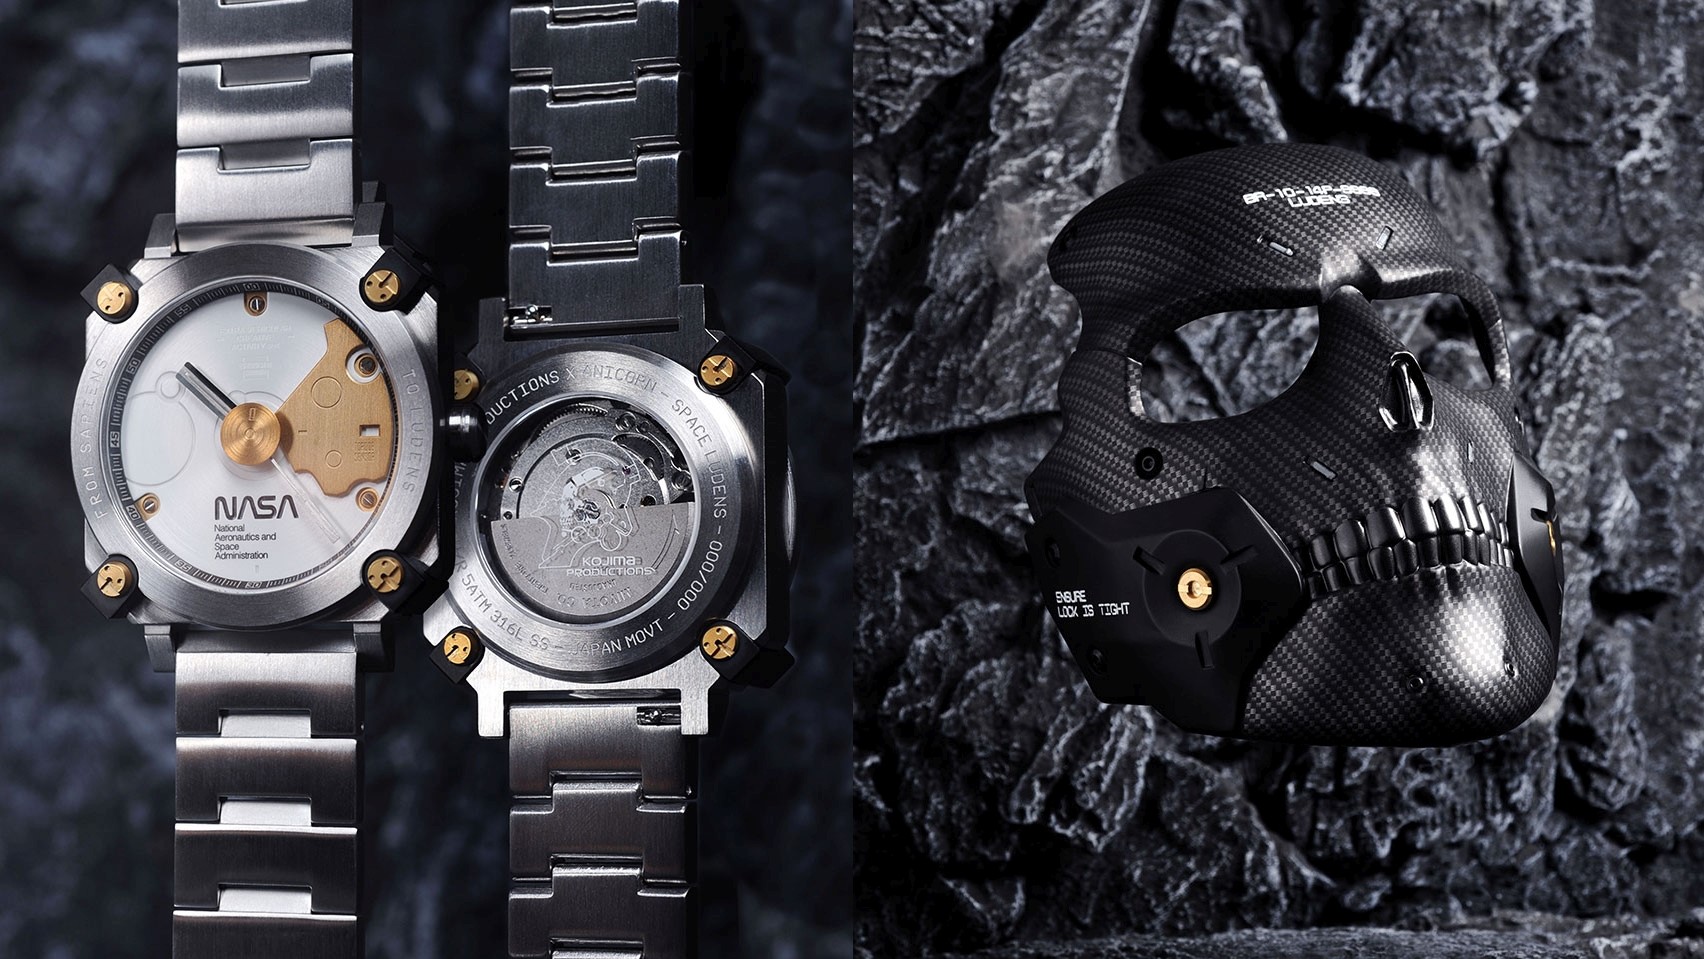 High-End Watch Brand Anicorn Collaborates With Kojima Productions And NASA On Space Ludens Watch